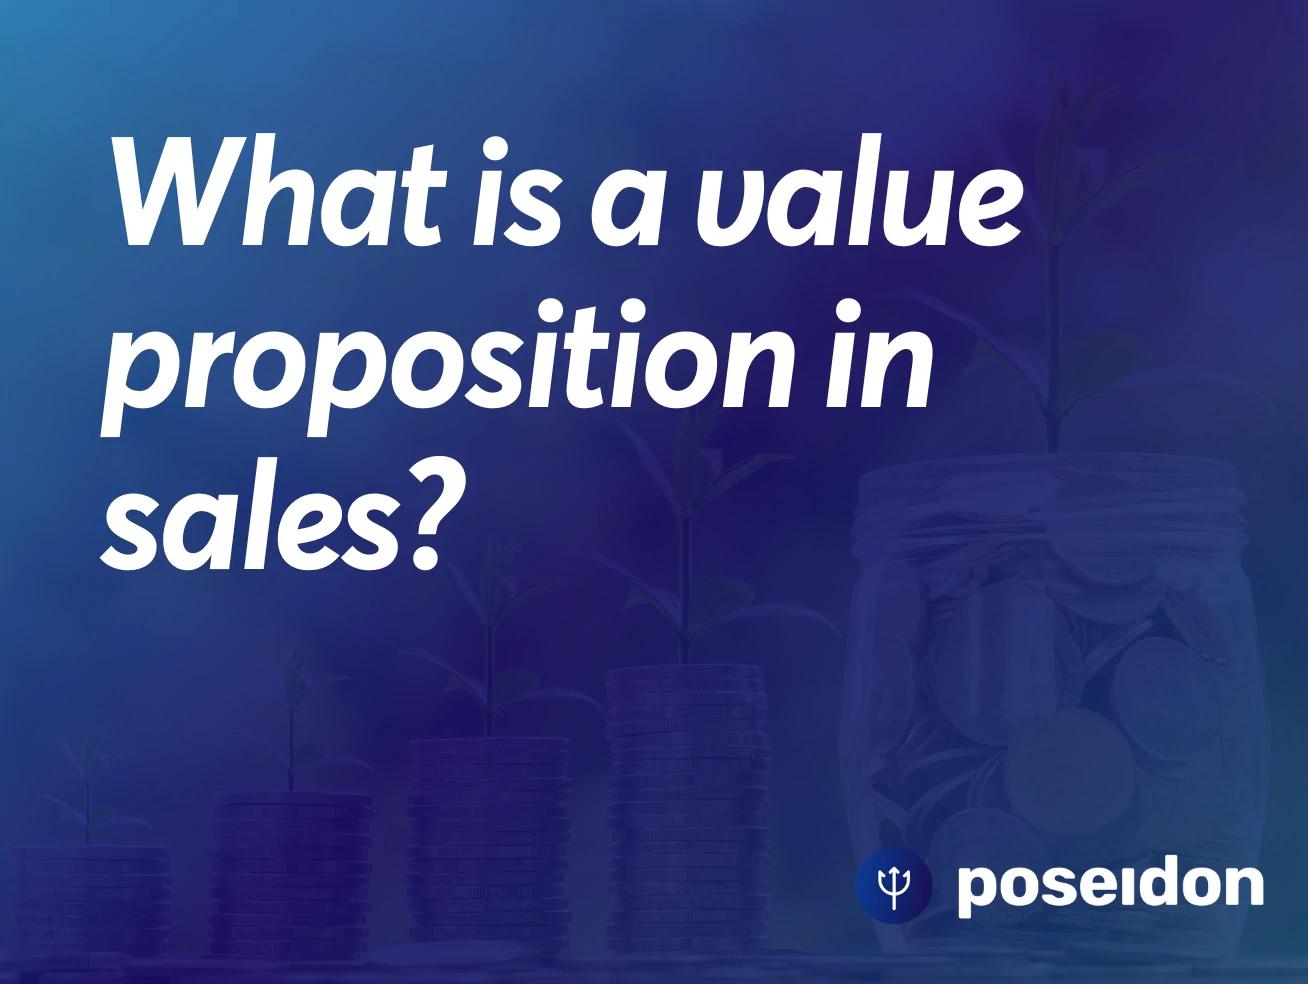 What is a value proposition in sales?